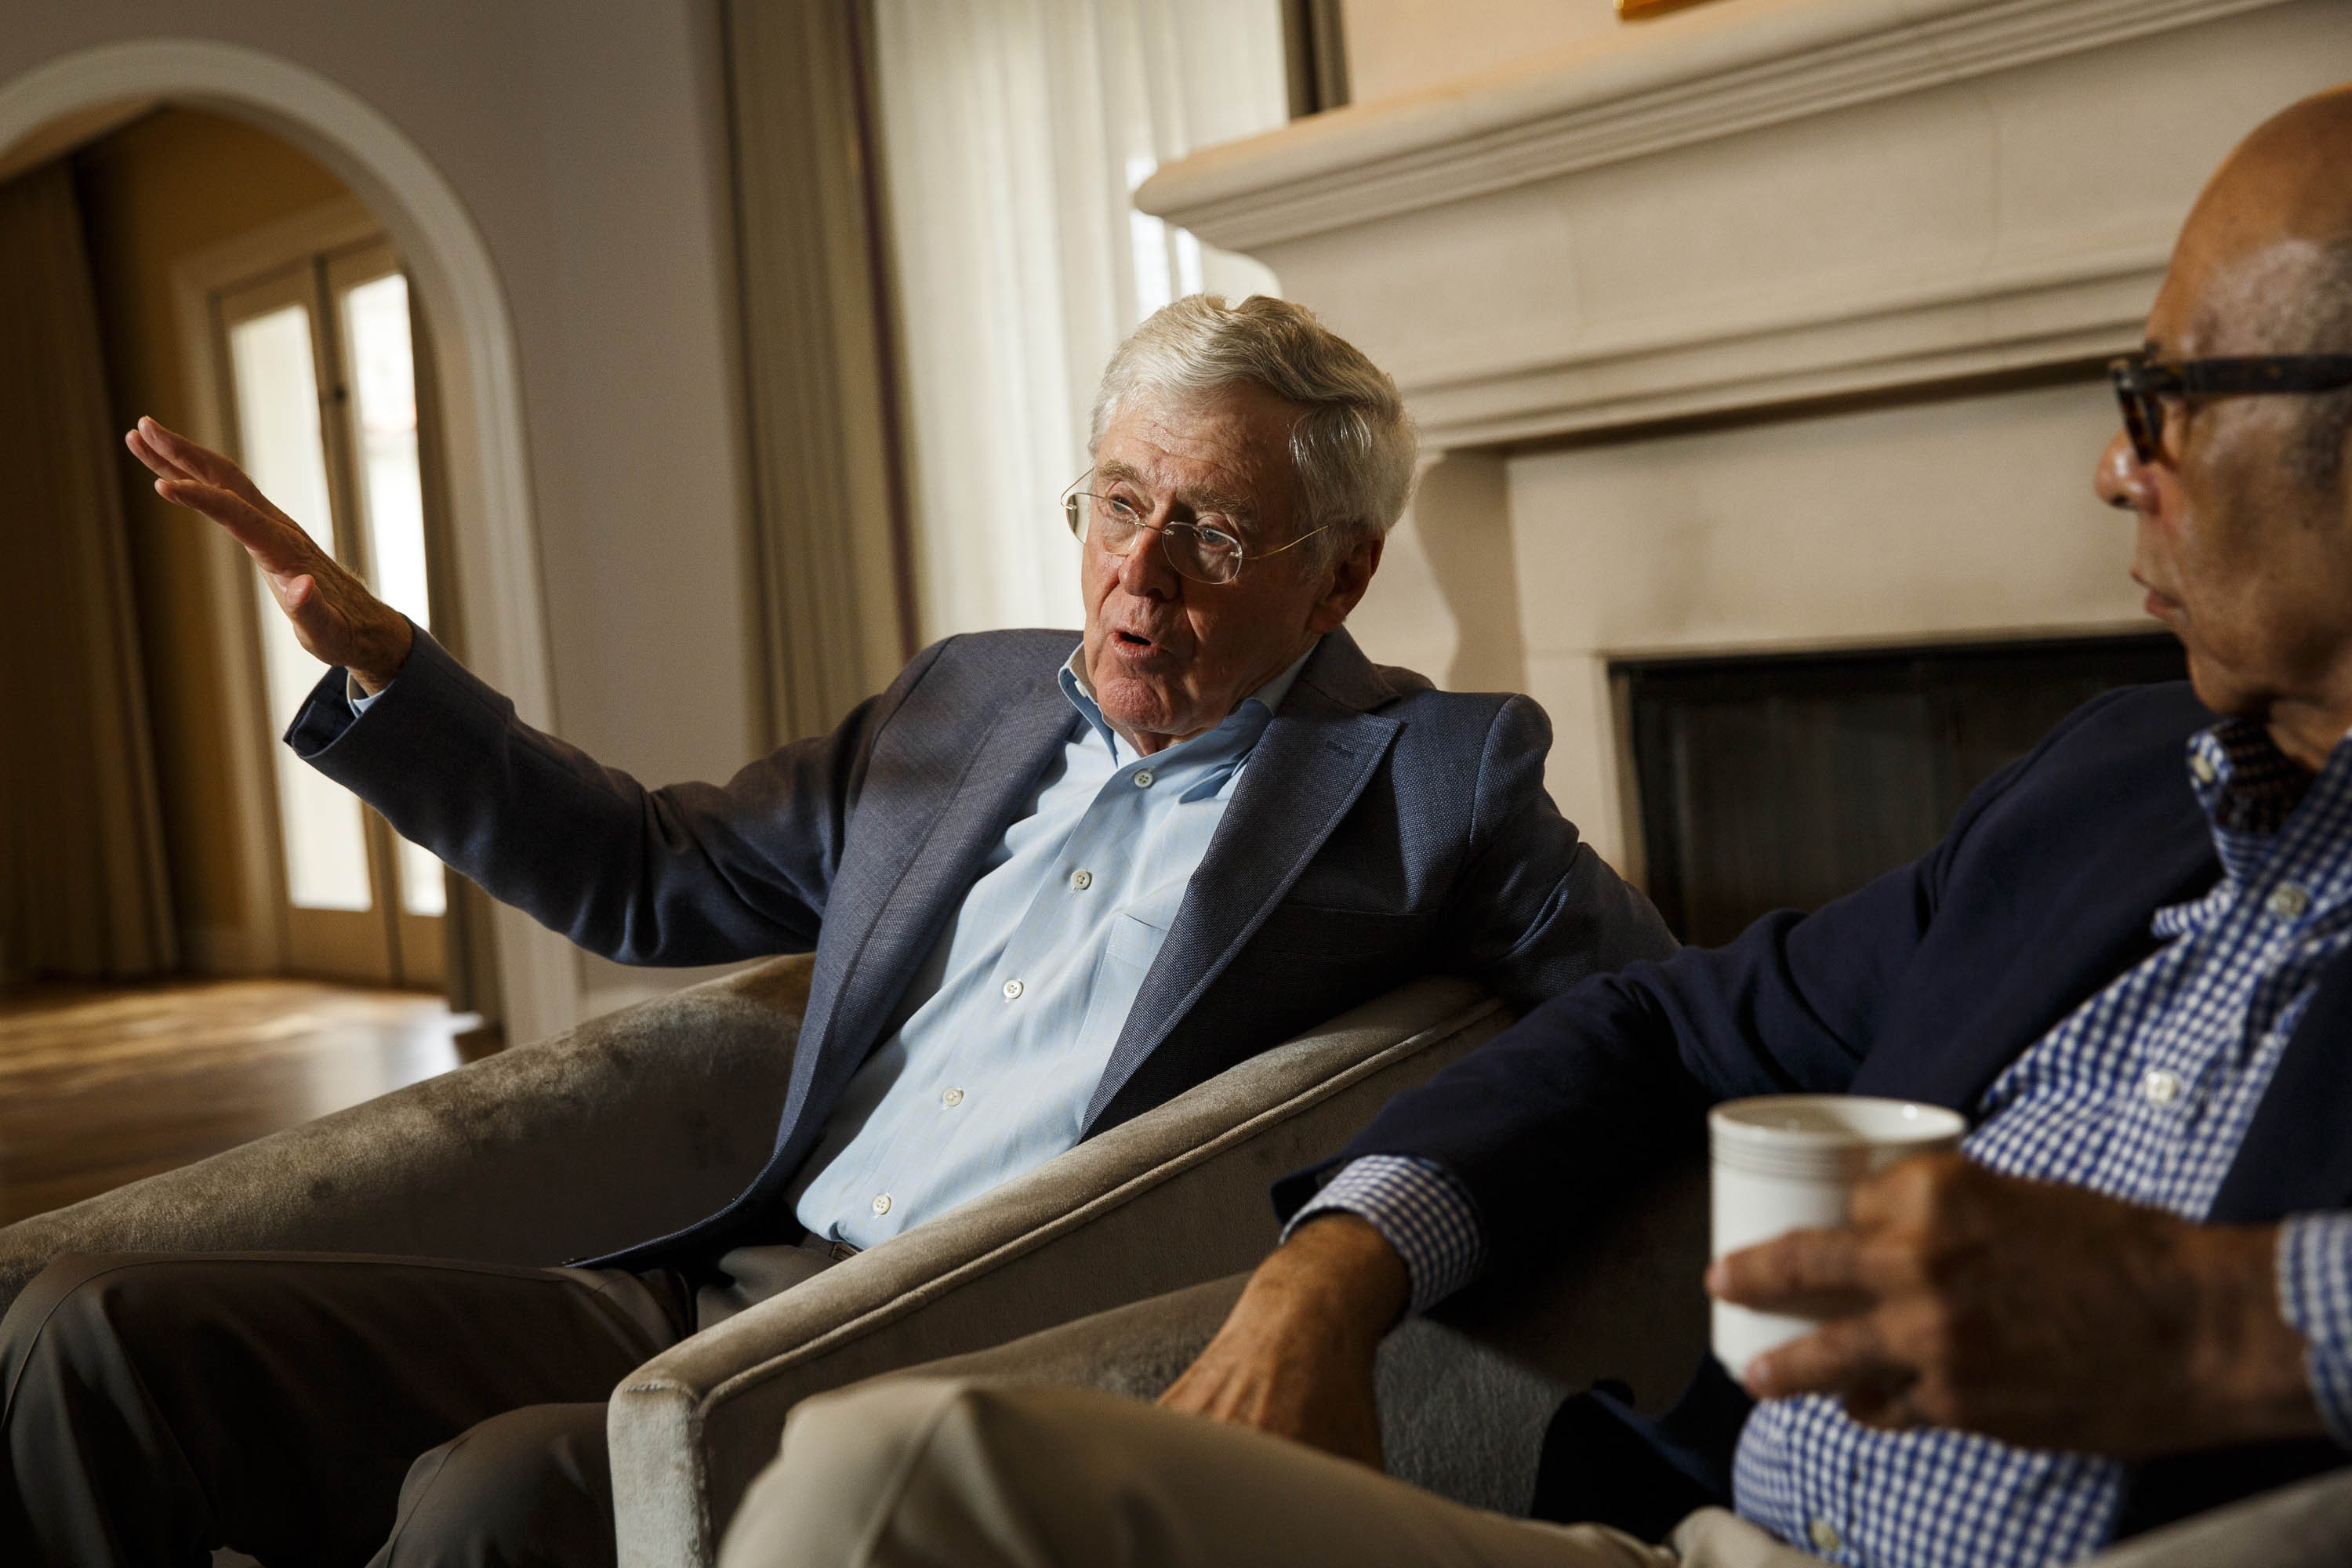 Charles Koch discusses his network’s goals at a donor summit in California. (Patrick T. Fallon—Washington Post/Getty Images)